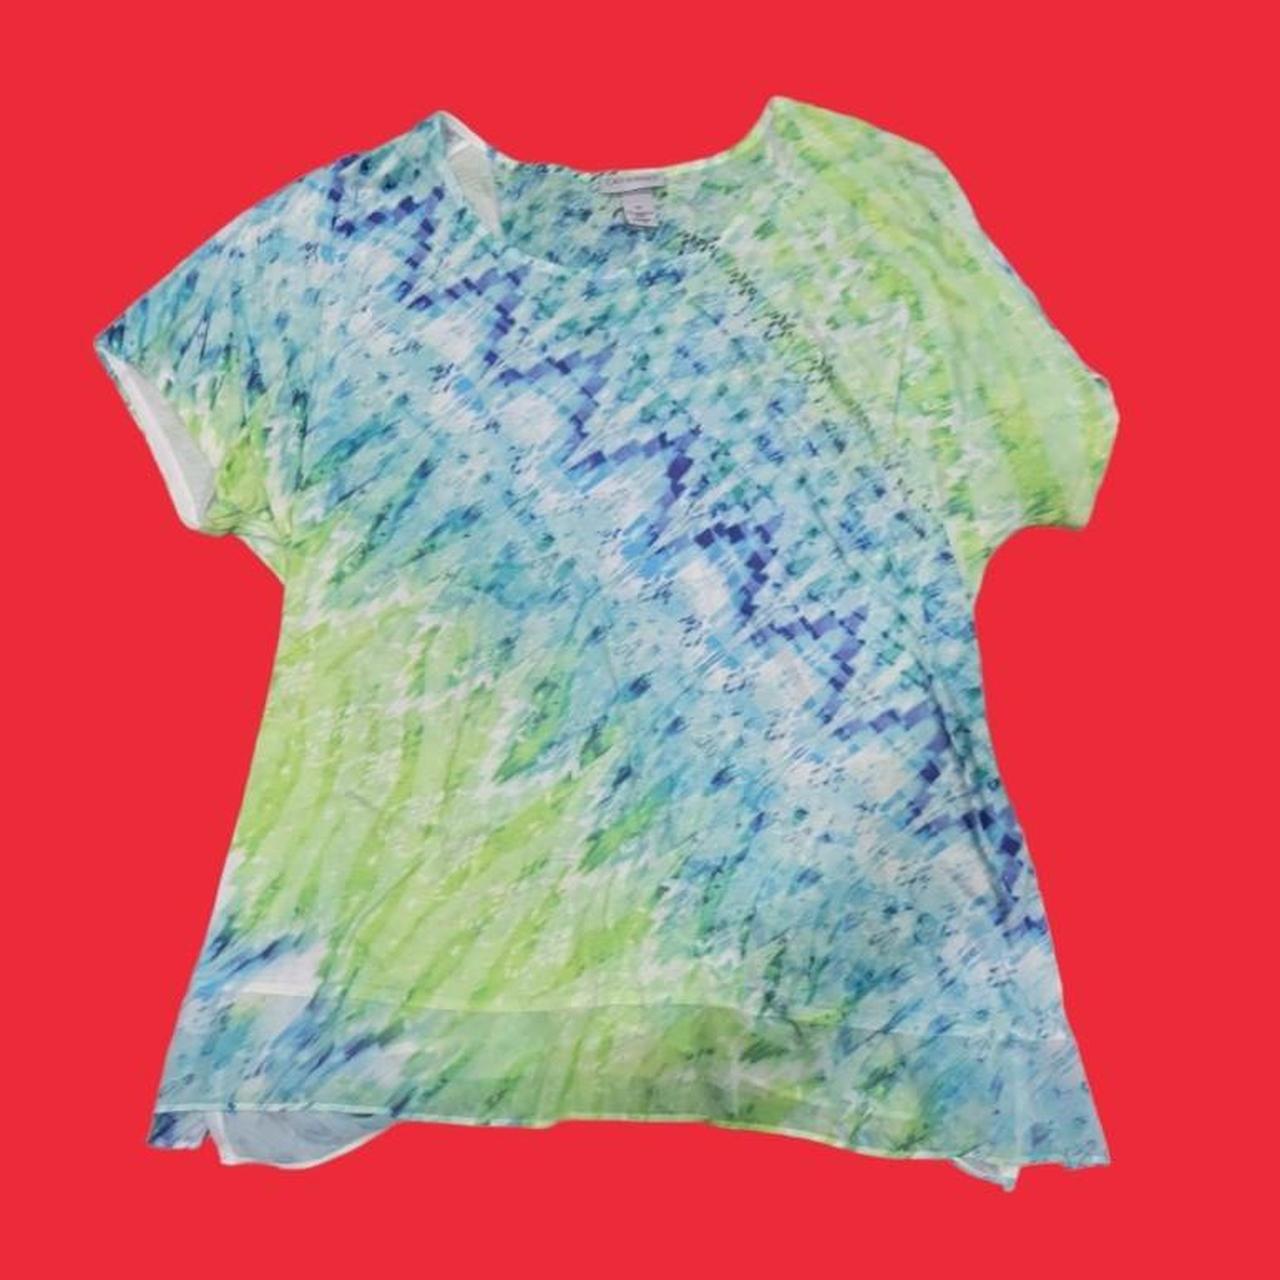 Catherine's Women's Green and Blue Shirt